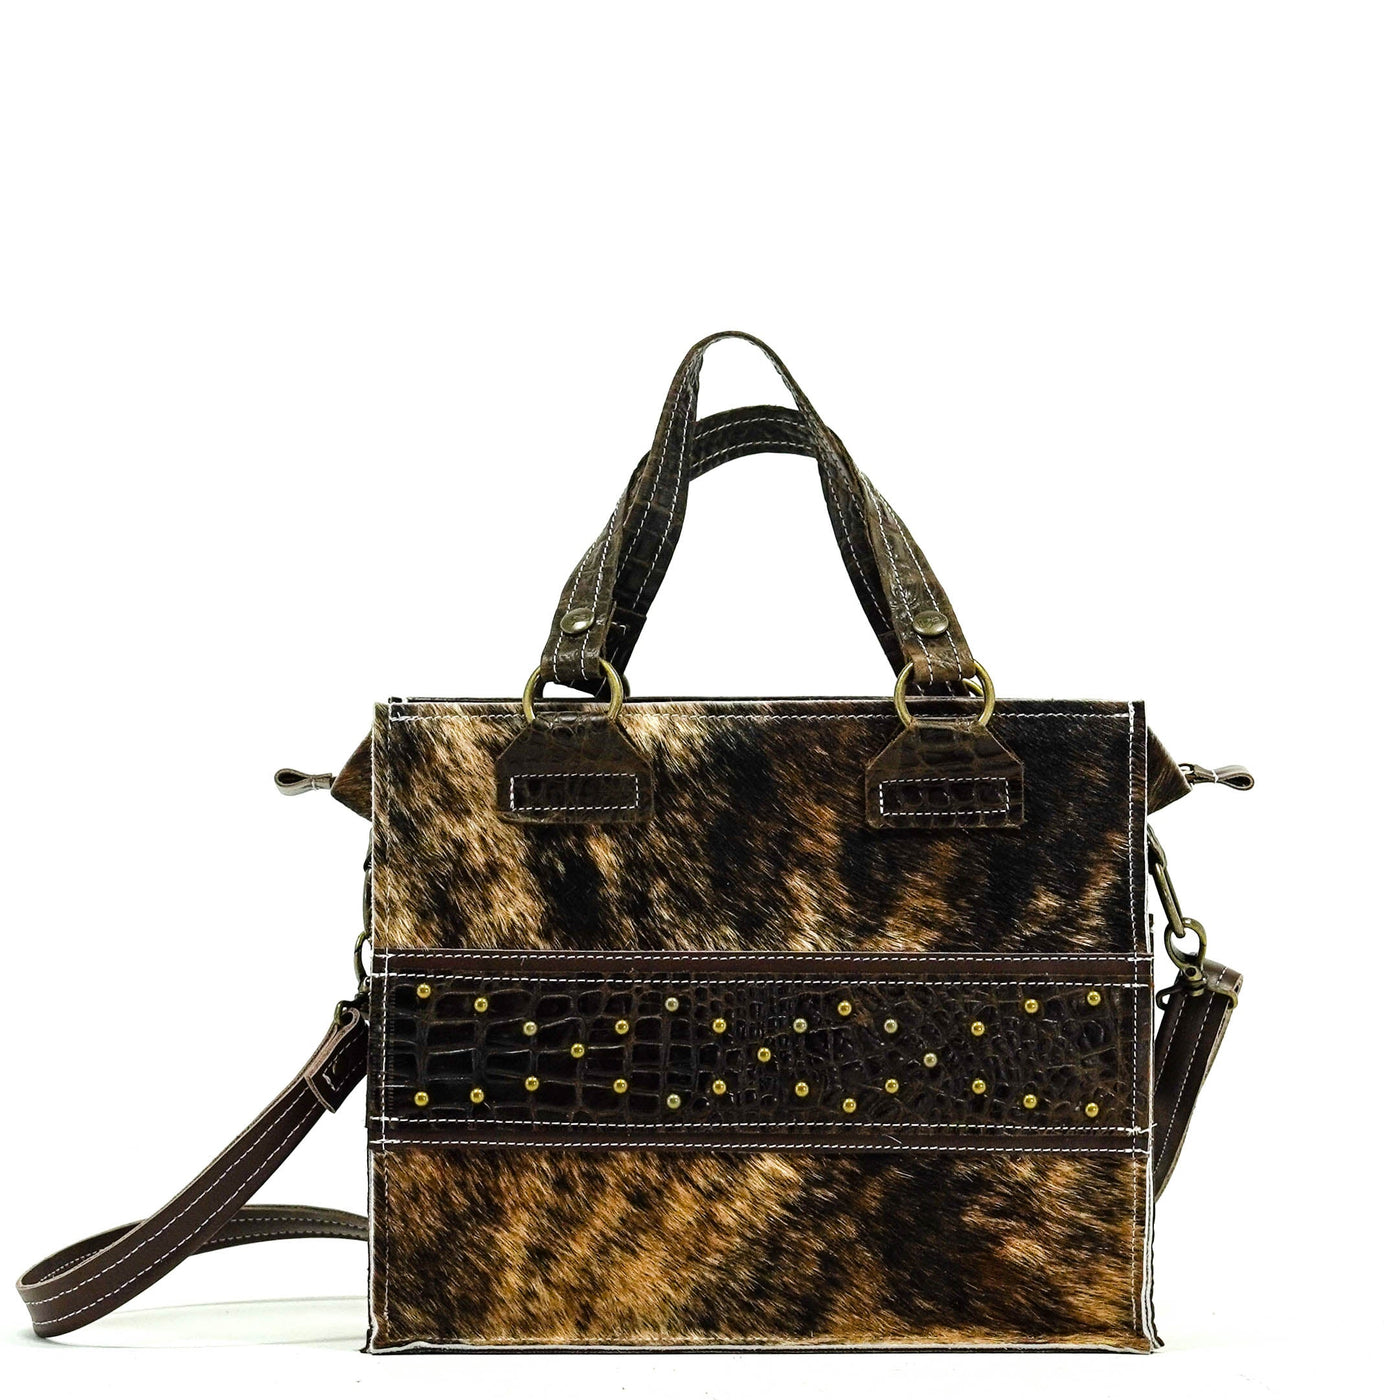 Minnie Pearl - Two-Tone Brindle w/ Saddle Croc-Minnie Pearl-Western-Cowhide-Bags-Handmade-Products-Gifts-Dancing Cactus Designs